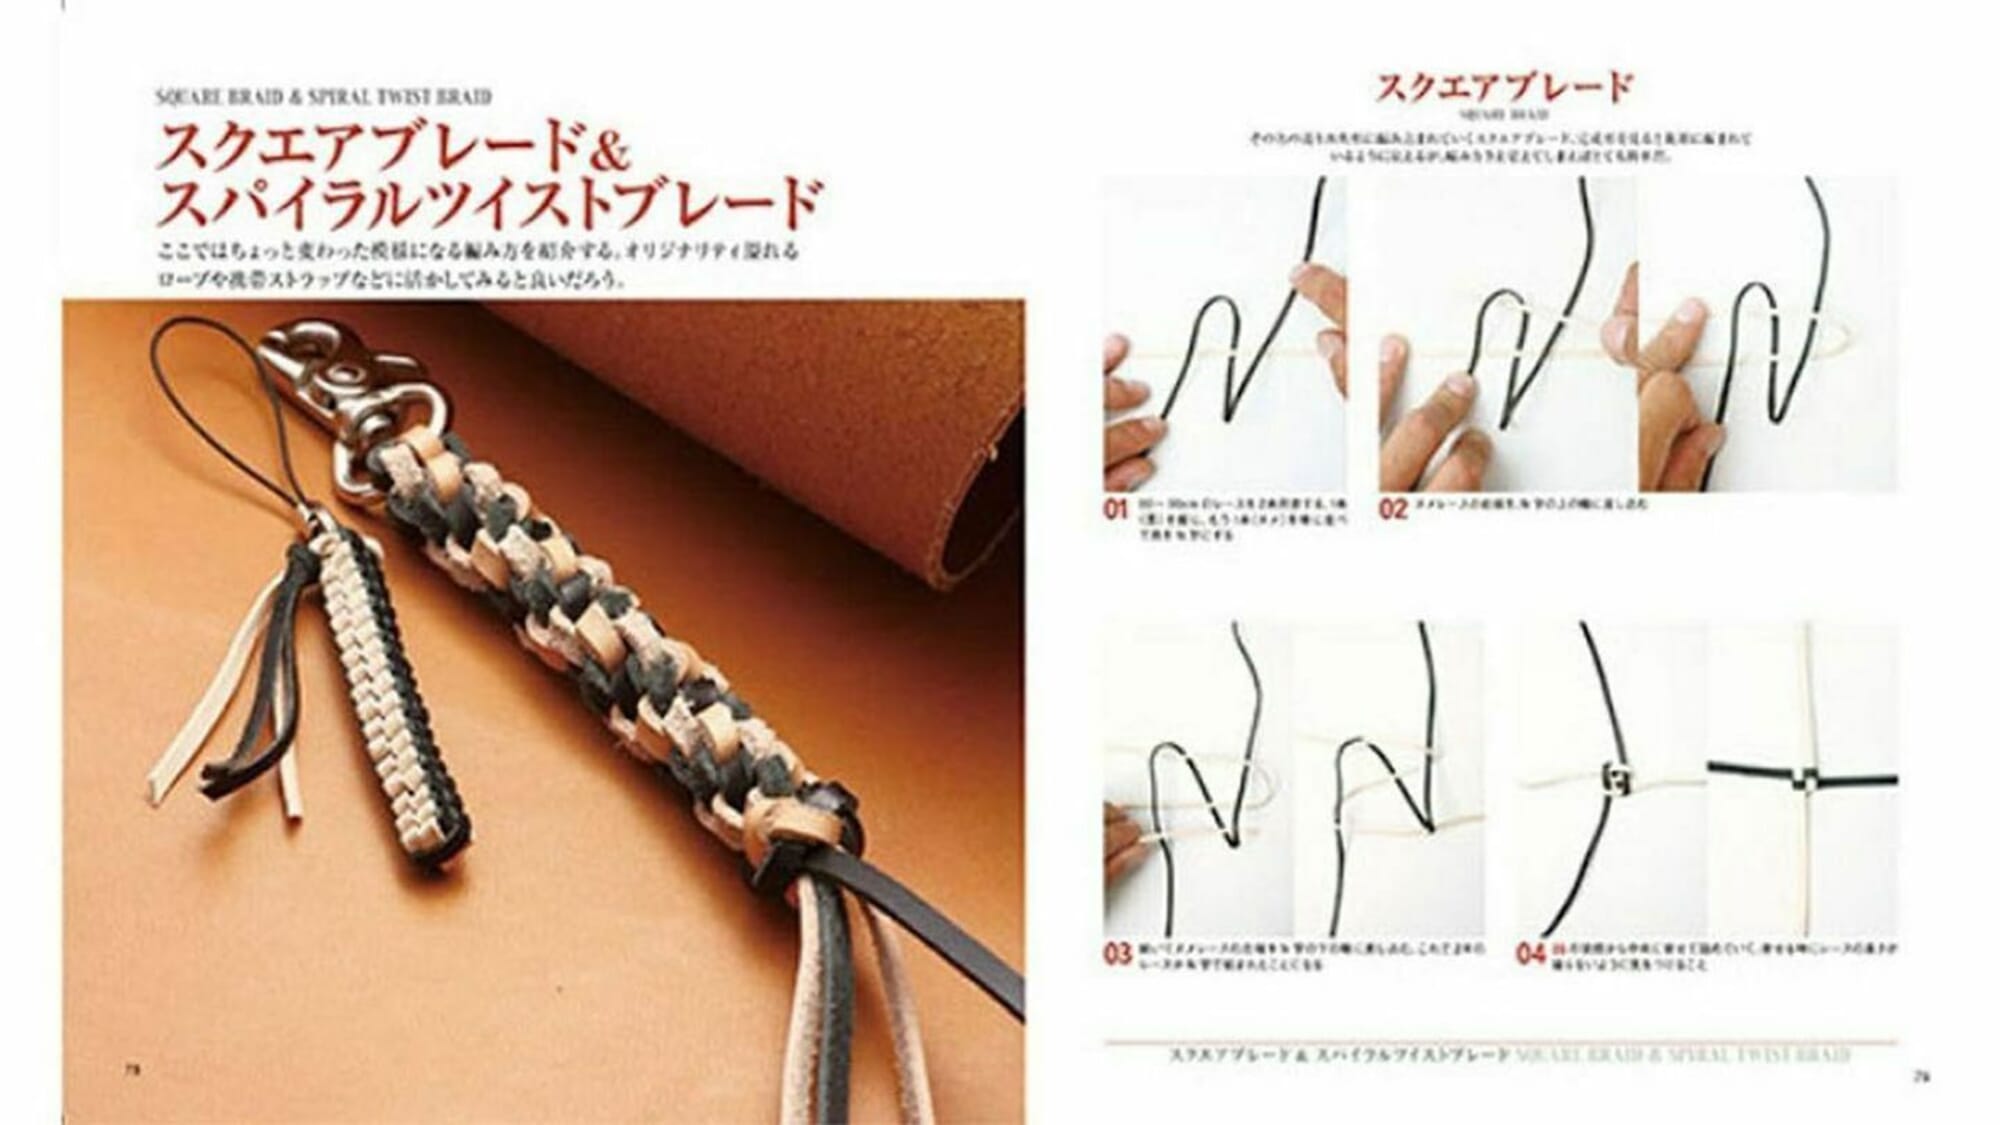 LEATHER BRAIDING TECHNIQUES: Leather braiding guide for beginners See more